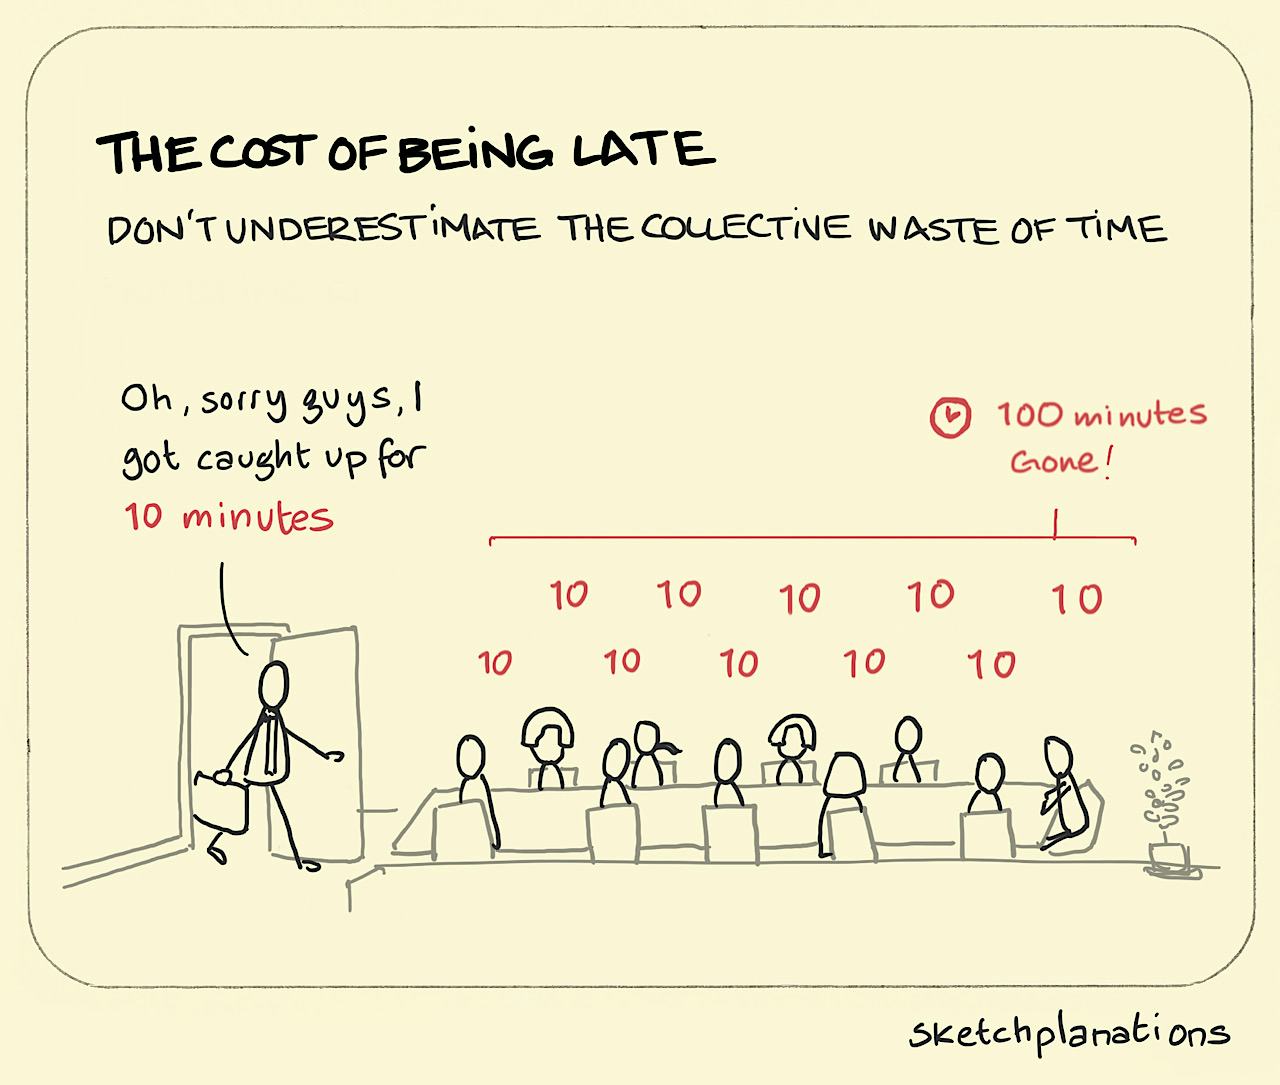 The cost of being late illustration: an executive walks into a meeting 10 mins late adding up to 100 total lost minutes of everyone else's time